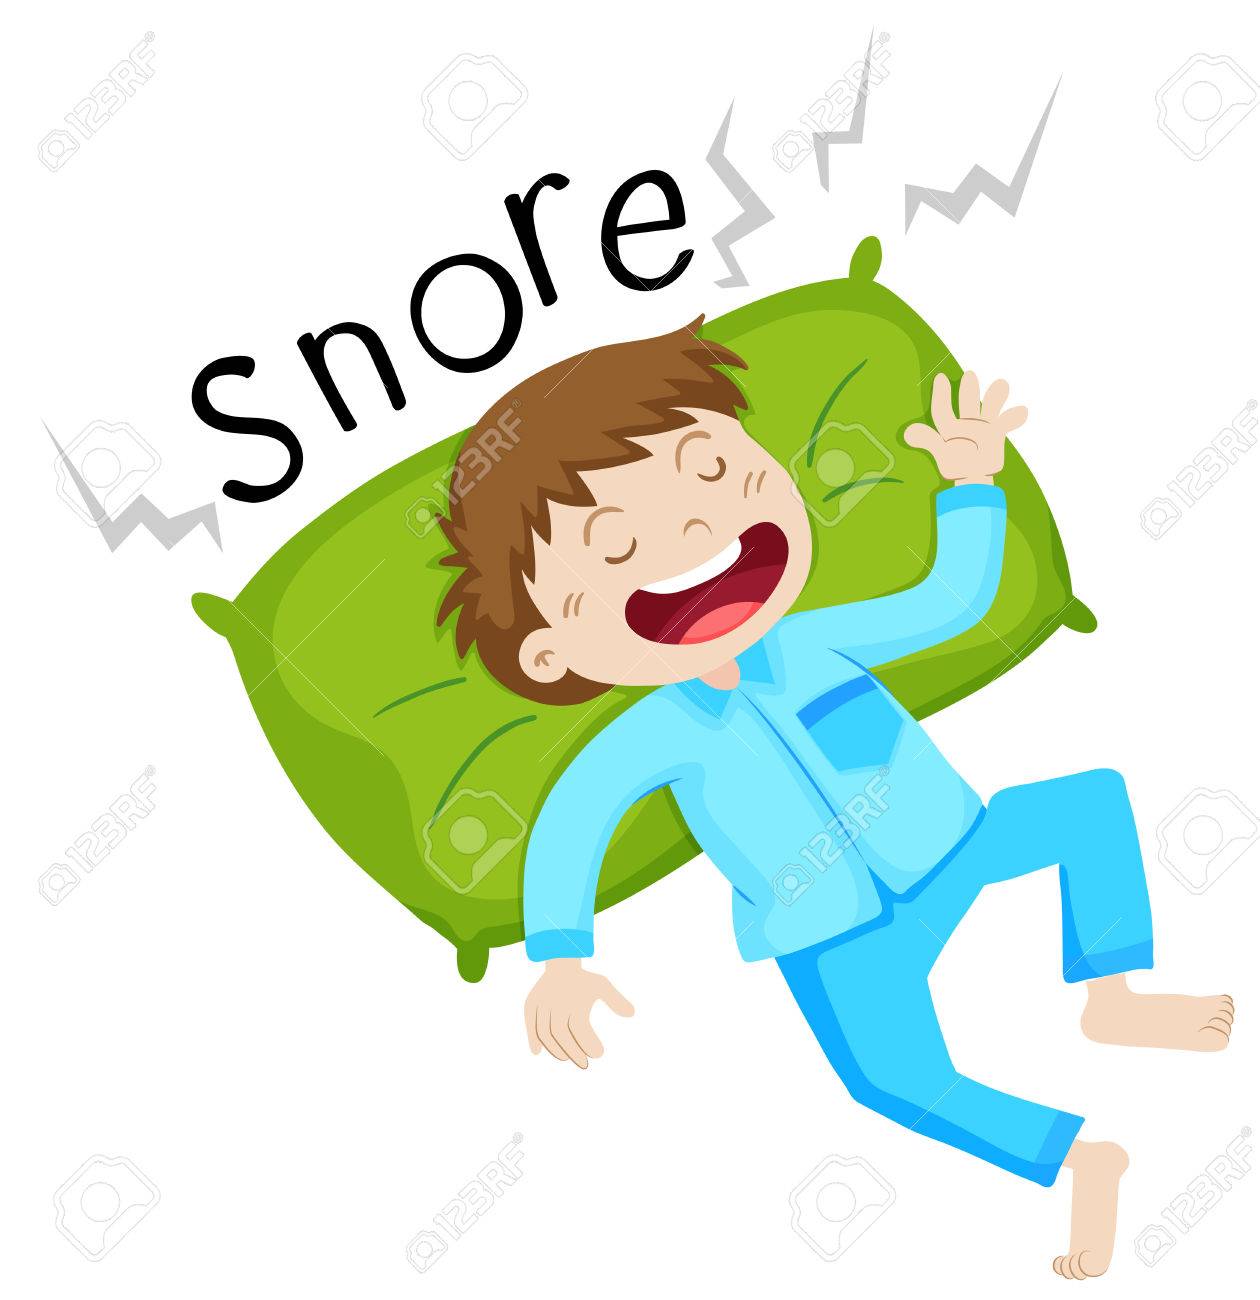 An image of a snoring wife.